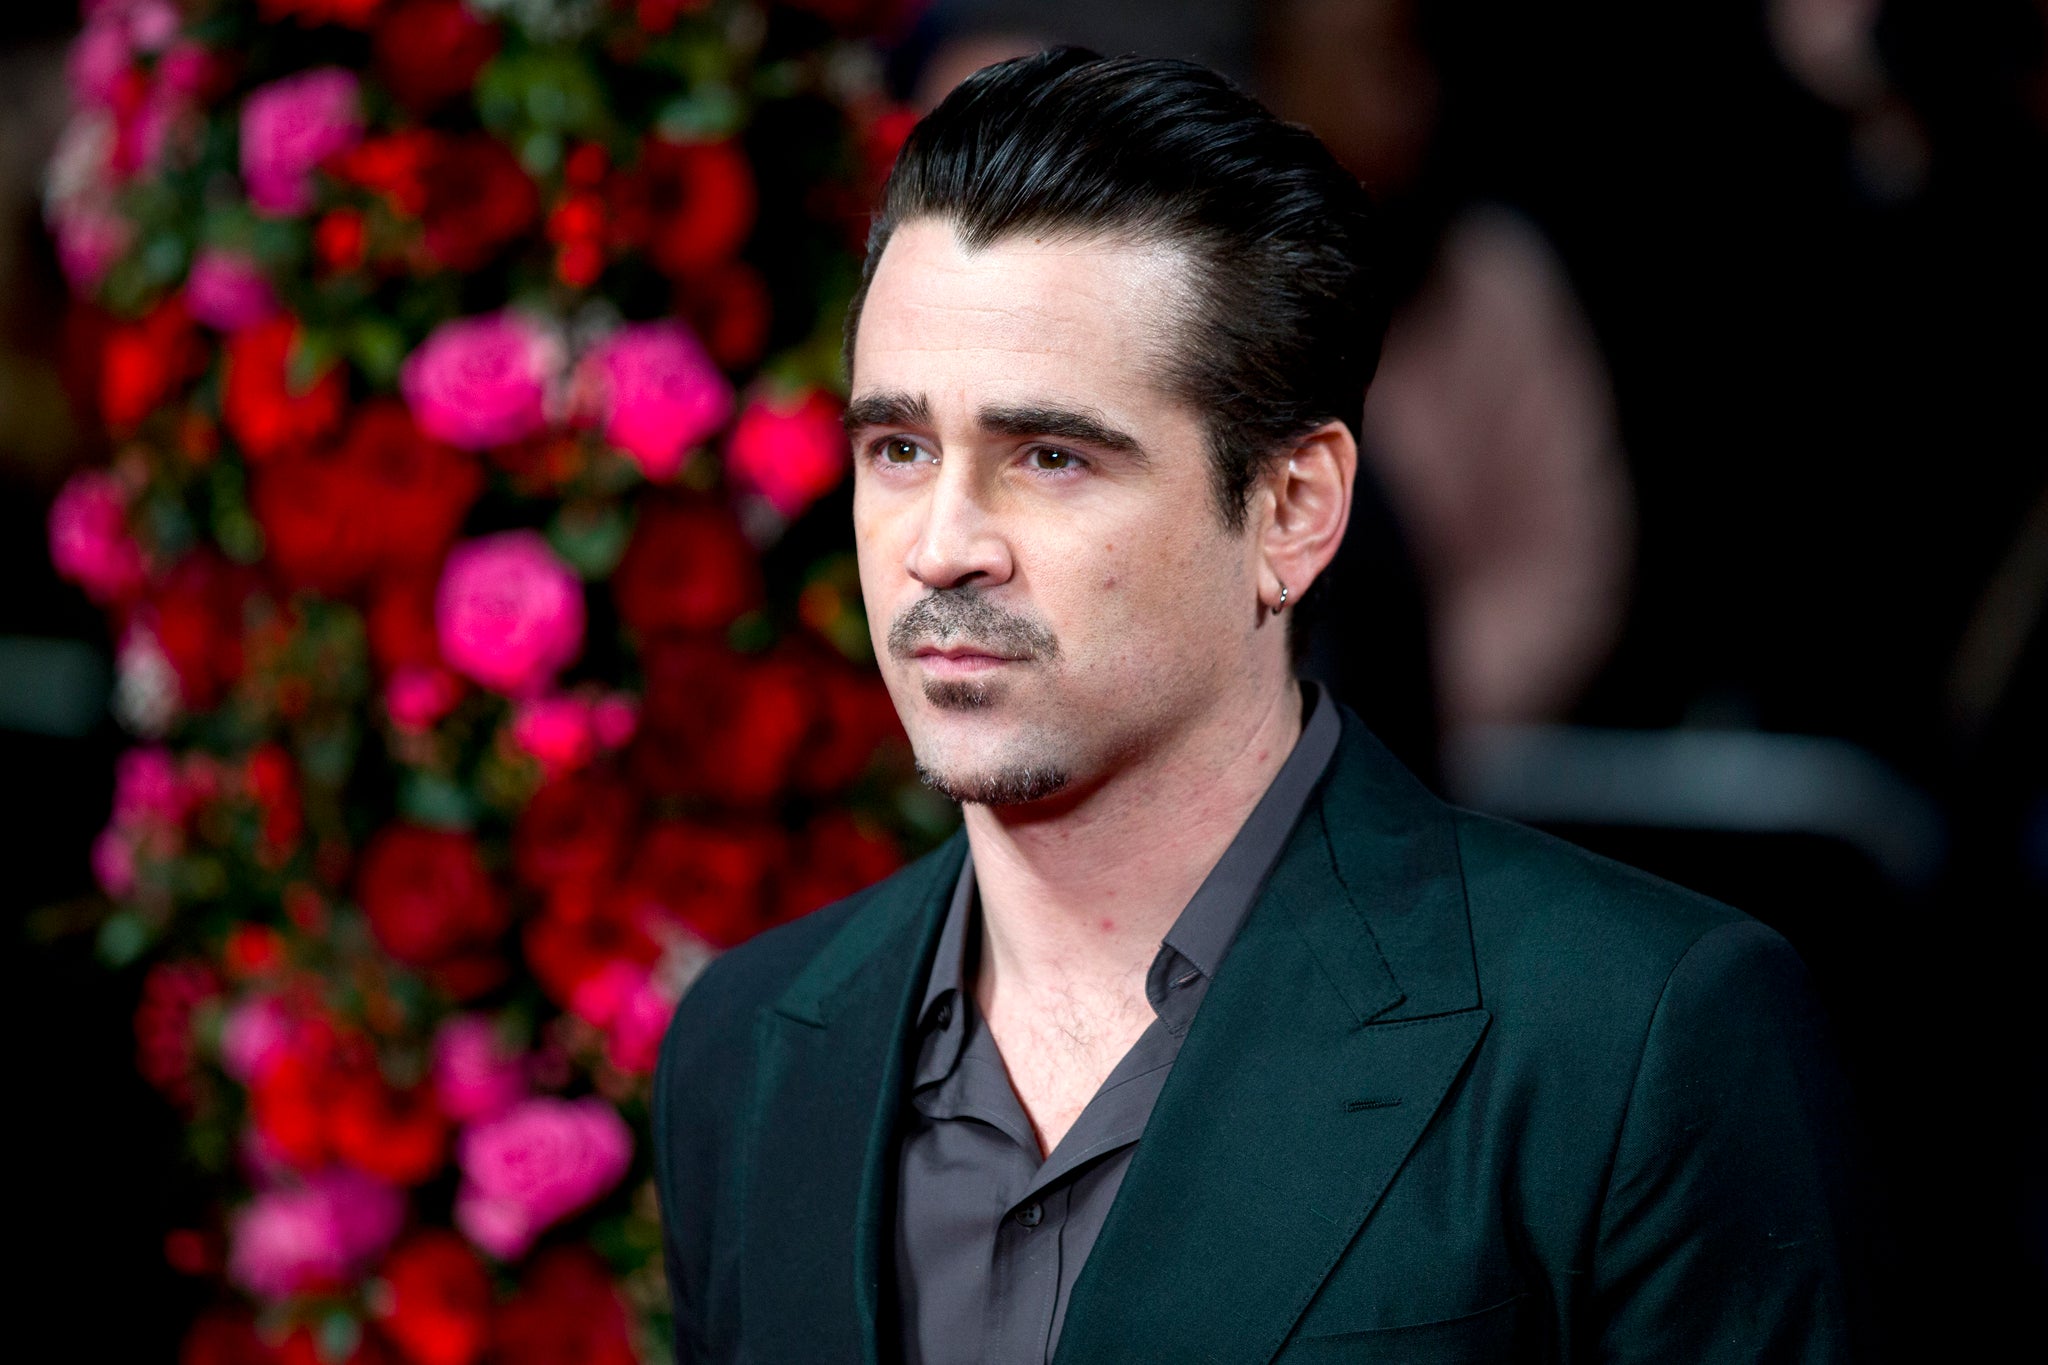 Colin Farrell arrives at the New York premiere of new film 'A New York Winter's Tale' (Getty)